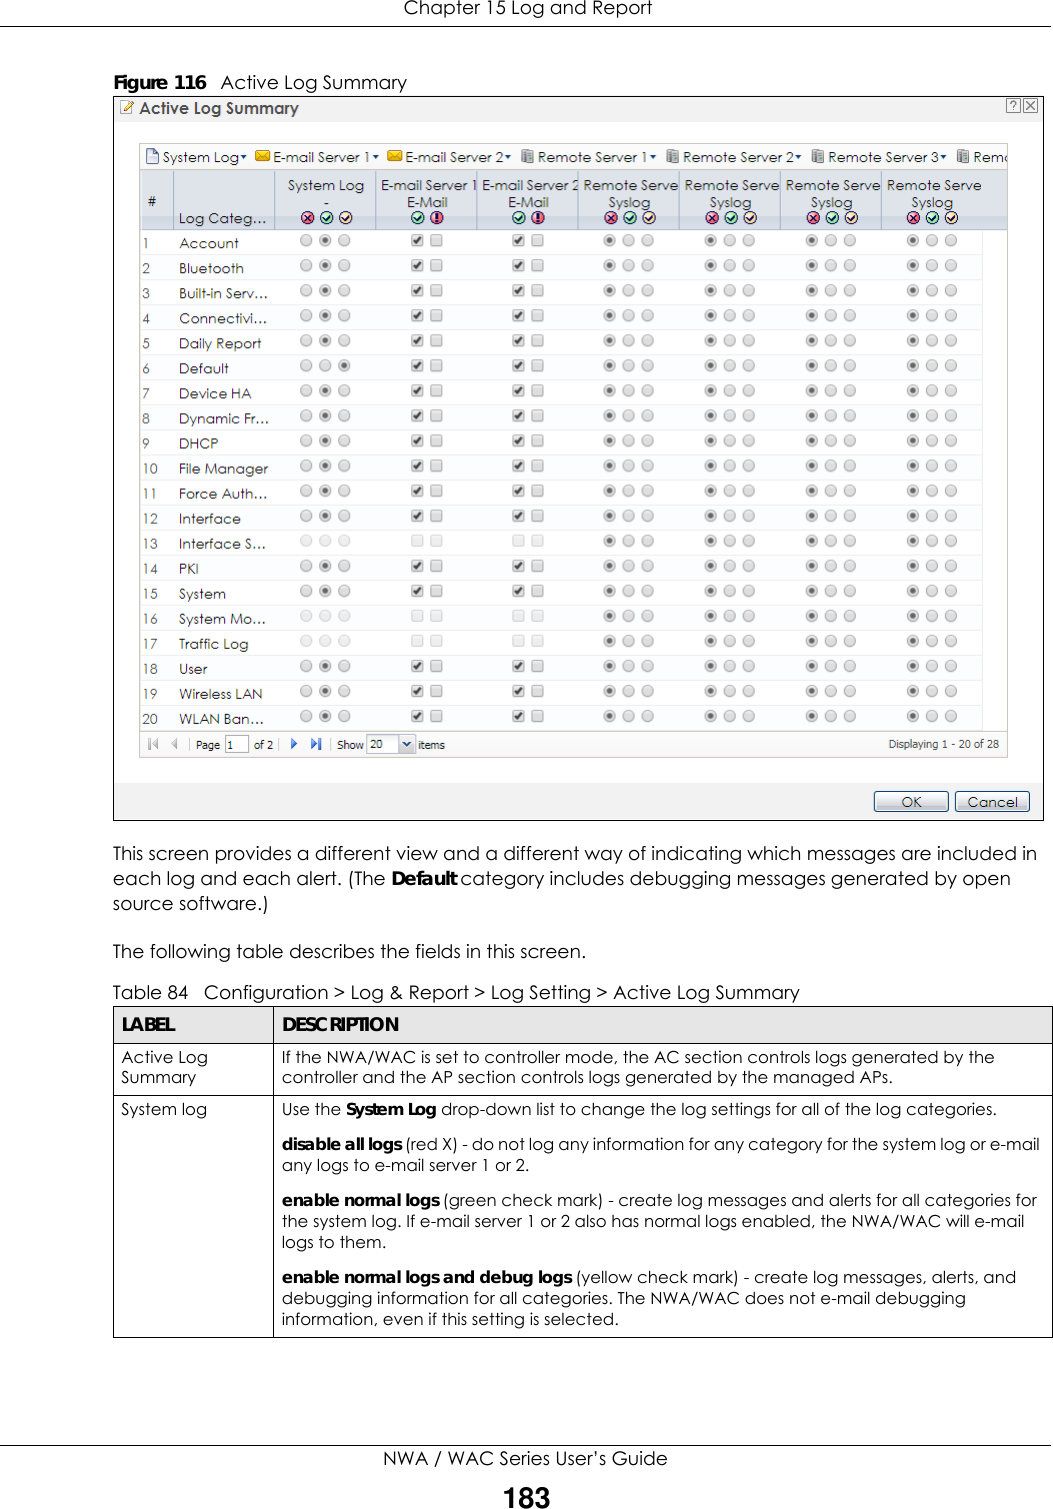  Chapter 15 Log and ReportNWA / WAC Series User’s Guide183Figure 116   Active Log Summary   This screen provides a different view and a different way of indicating which messages are included in each log and each alert. (The Default category includes debugging messages generated by open source software.)The following table describes the fields in this screen.  Table 84   Configuration &gt; Log &amp; Report &gt; Log Setting &gt; Active Log SummaryLABEL DESCRIPTIONActive Log Summary If the NWA/WAC is set to controller mode, the AC section controls logs generated by the controller and the AP section controls logs generated by the managed APs.System log Use the System Log drop-down list to change the log settings for all of the log categories.disable all logs (red X) - do not log any information for any category for the system log or e-mail any logs to e-mail server 1 or 2.enable normal logs (green check mark) - create log messages and alerts for all categories for the system log. If e-mail server 1 or 2 also has normal logs enabled, the NWA/WAC will e-mail logs to them.enable normal logs and debug logs (yellow check mark) - create log messages, alerts, and debugging information for all categories. The NWA/WAC does not e-mail debugging information, even if this setting is selected.